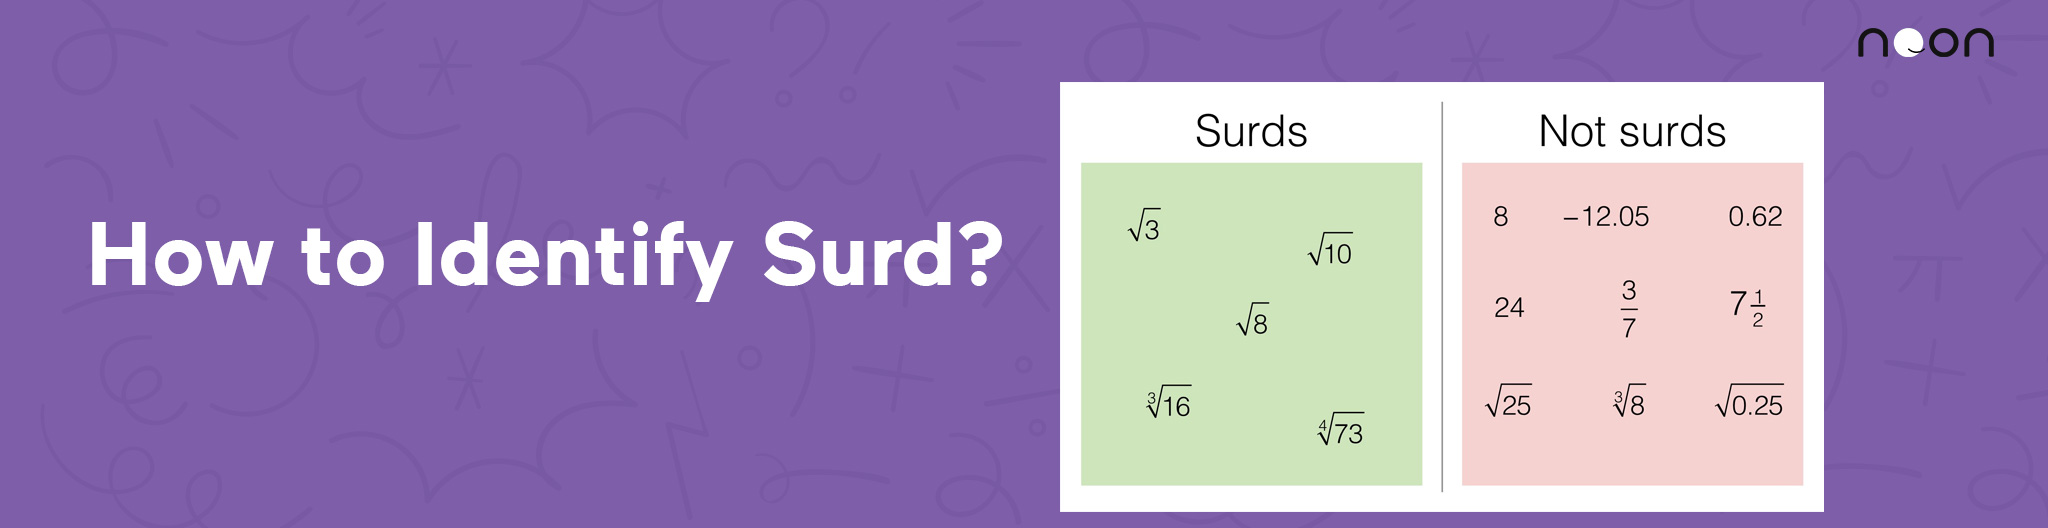 How to Identify Surd